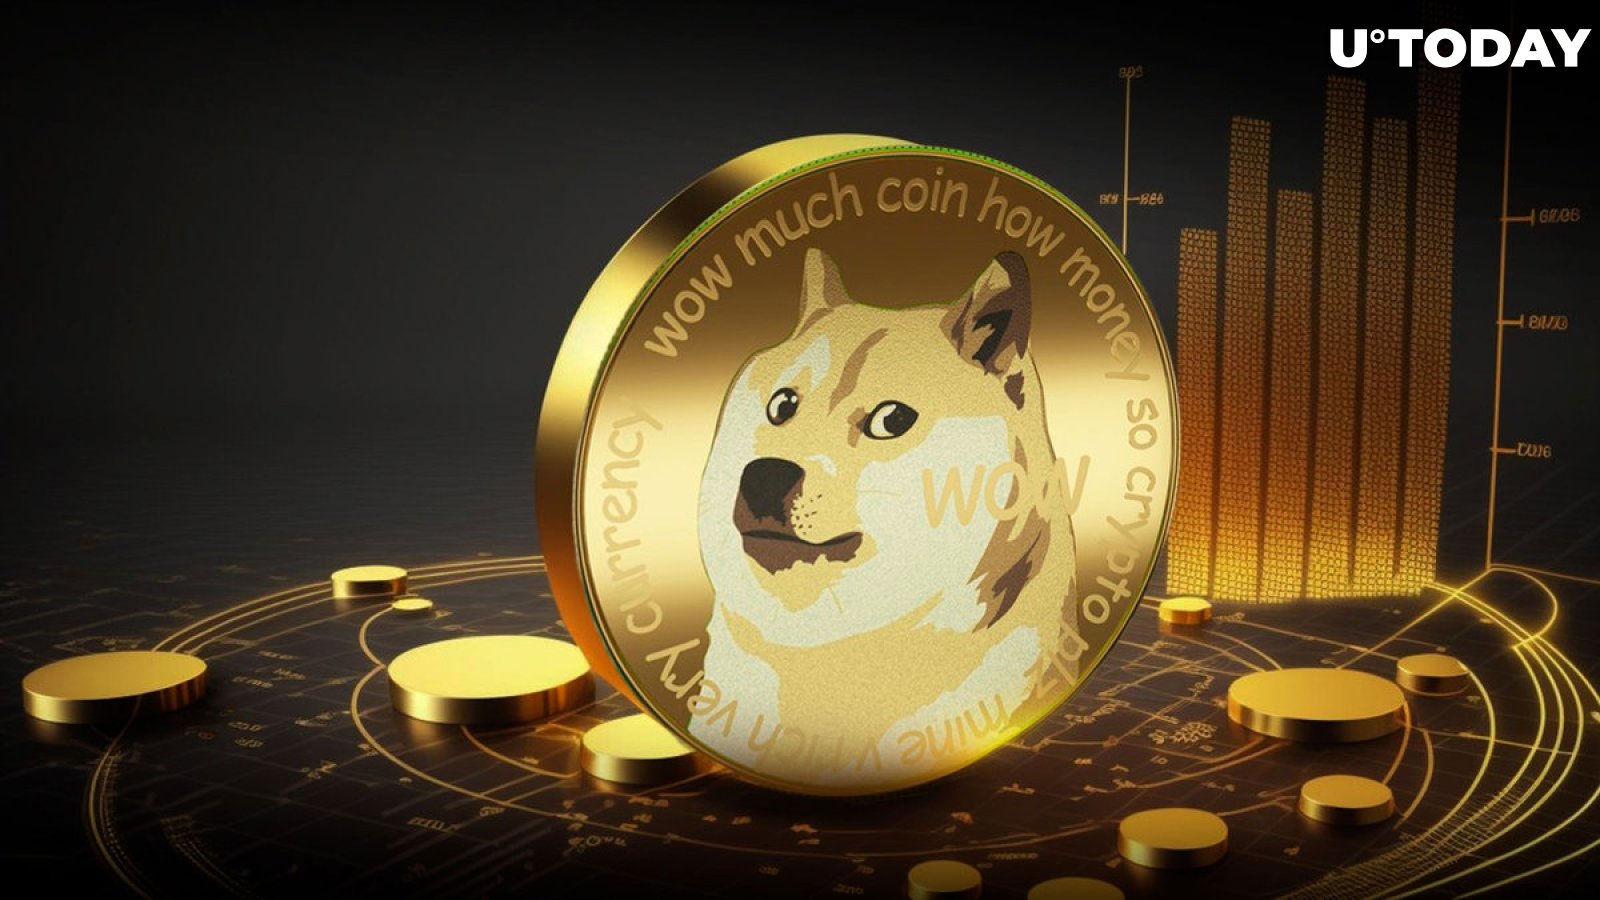 Dogecoin: A cryptocurrency joke with a recurring punchline | Fortune